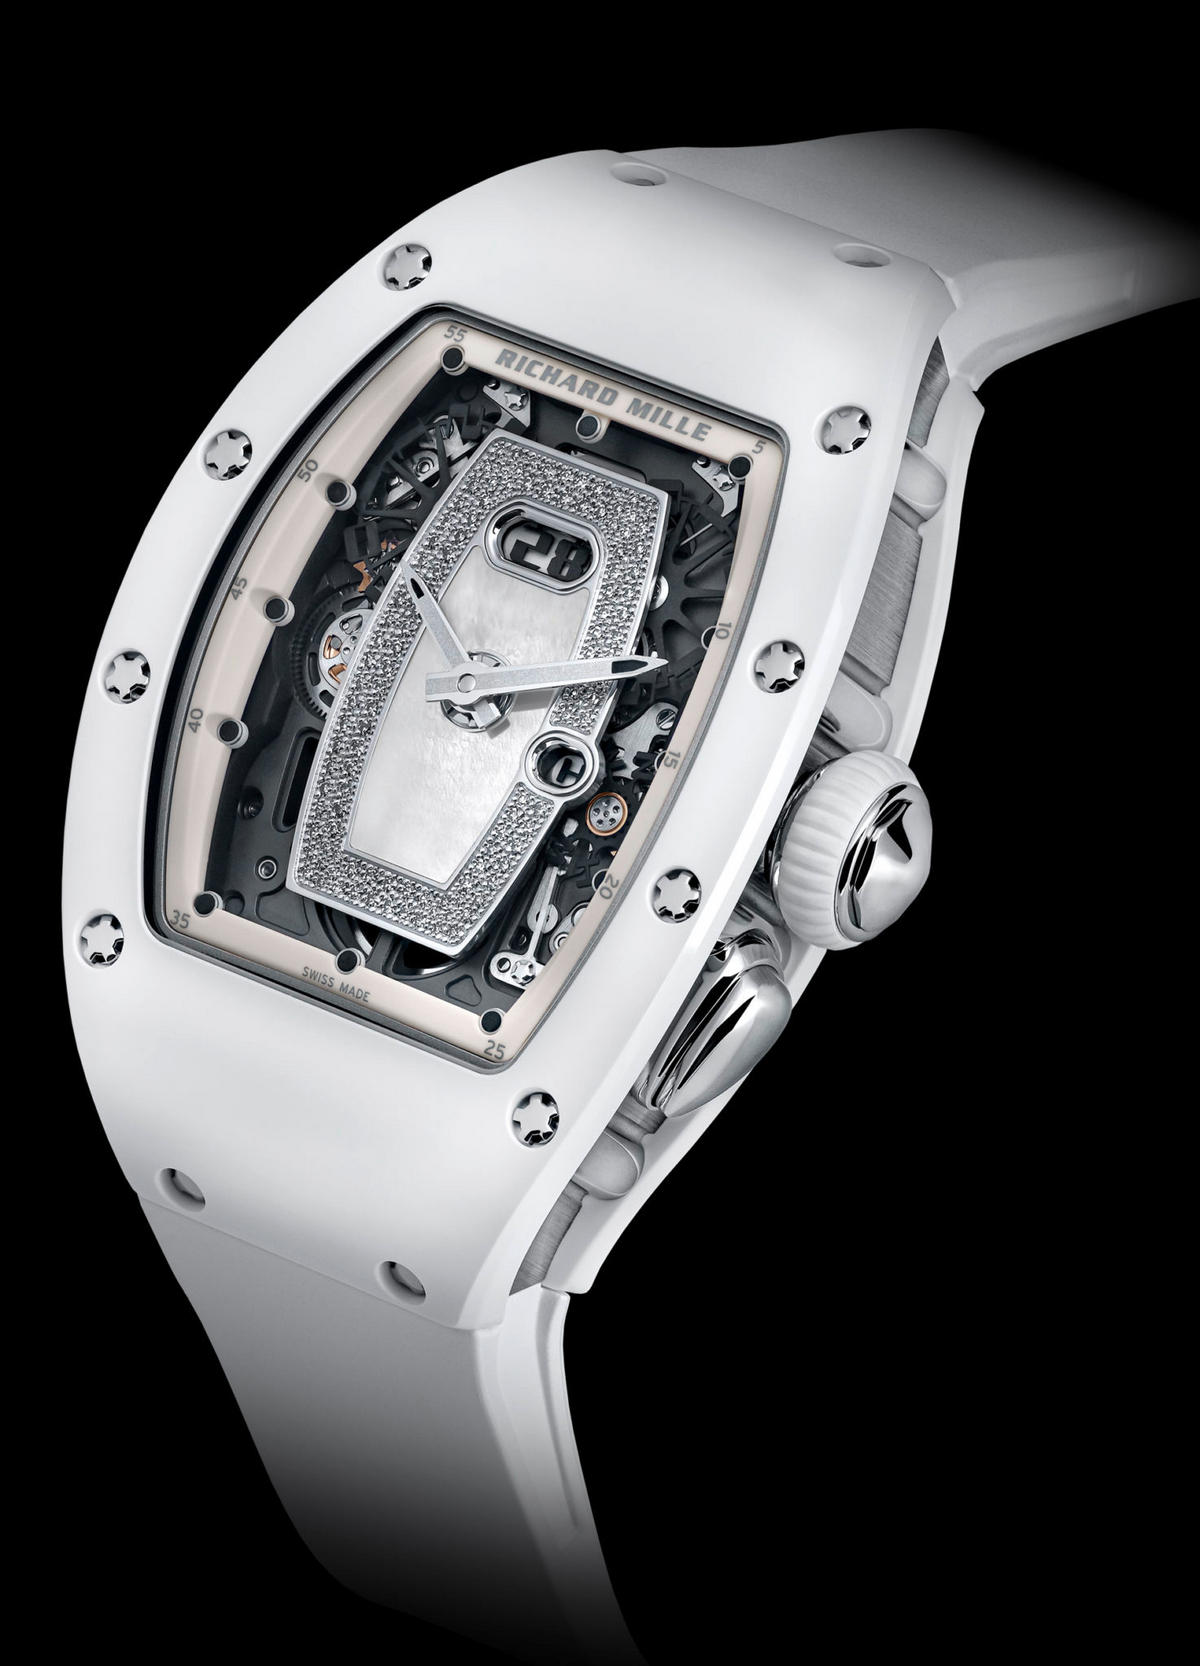 Richard Mille has introduced a $180,000 ladies watch in white ceramic ...